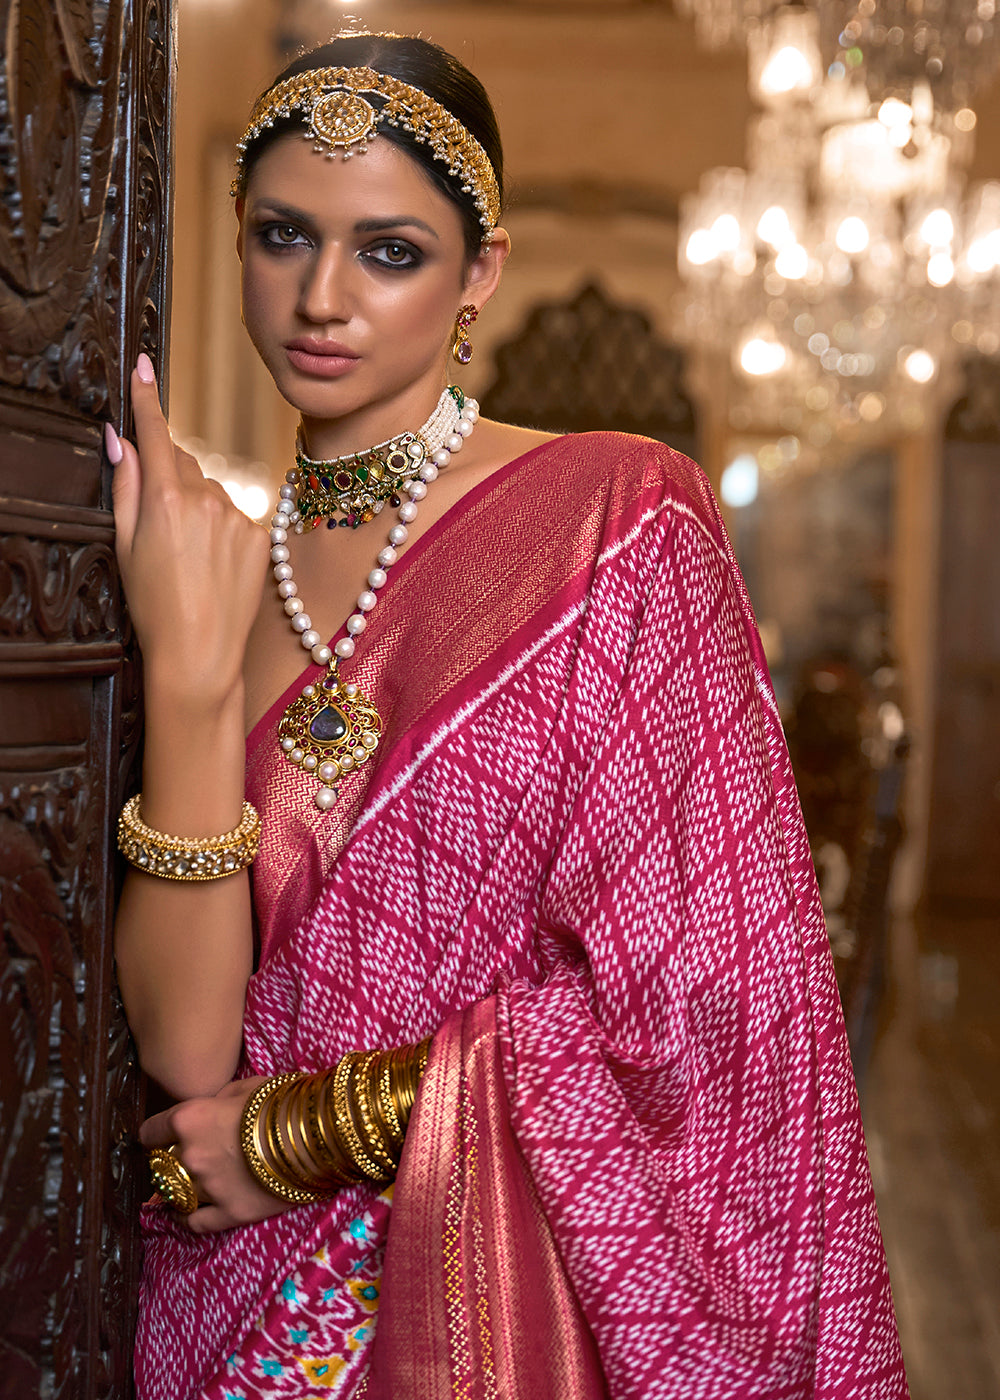 Shop Now Astounding Pink Woven Zari & Printed Patola Silk Traditional Saree from Empress Clothing in USA, UK, Canada & Worldwide. 